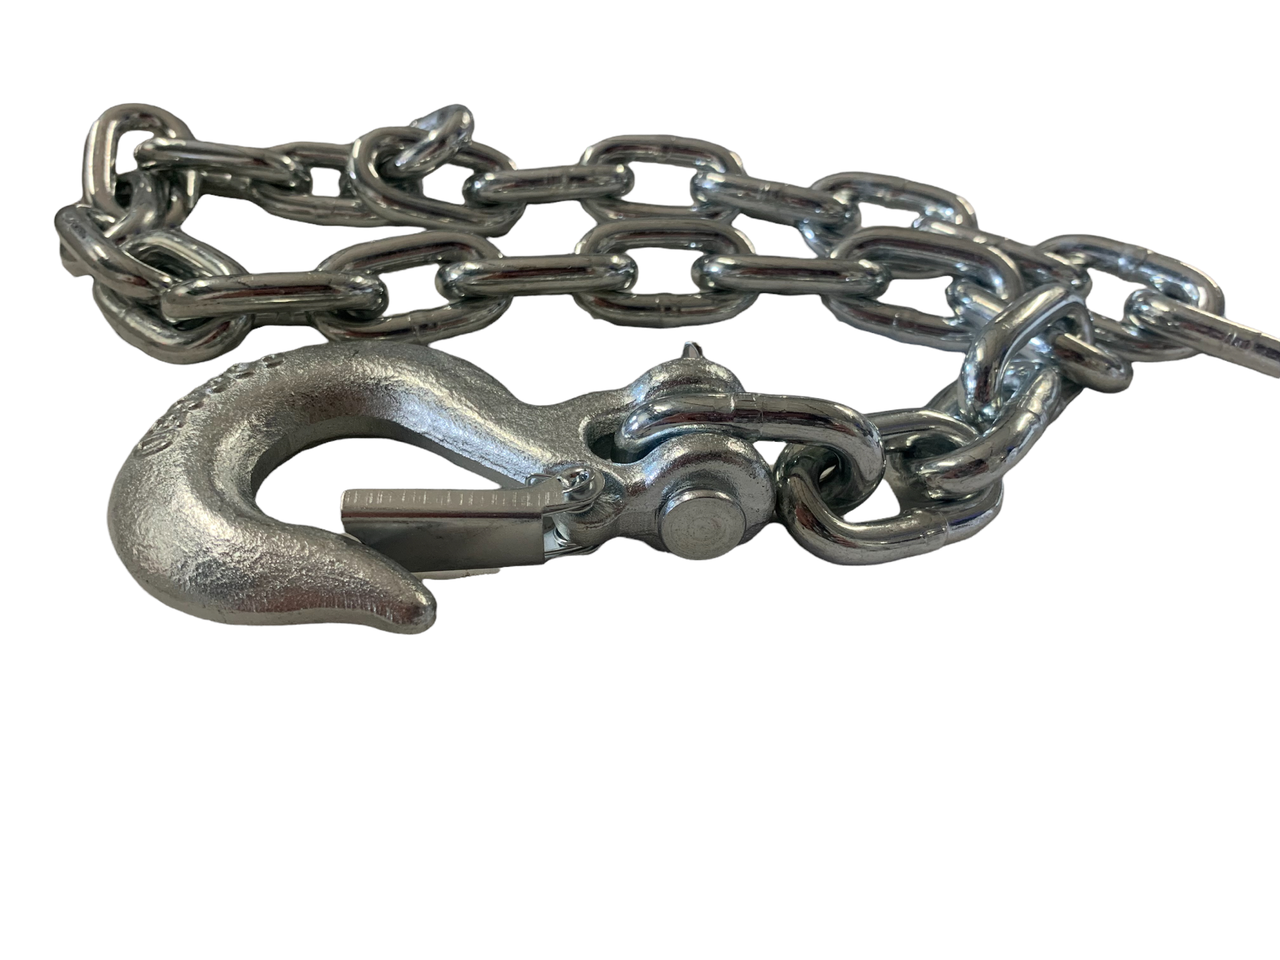 Shocker Gooseneck Replacement Safety Chain - One 42 Long 3/8 Chain with Clevis Hook & Latch - 1 Unit SH-GC